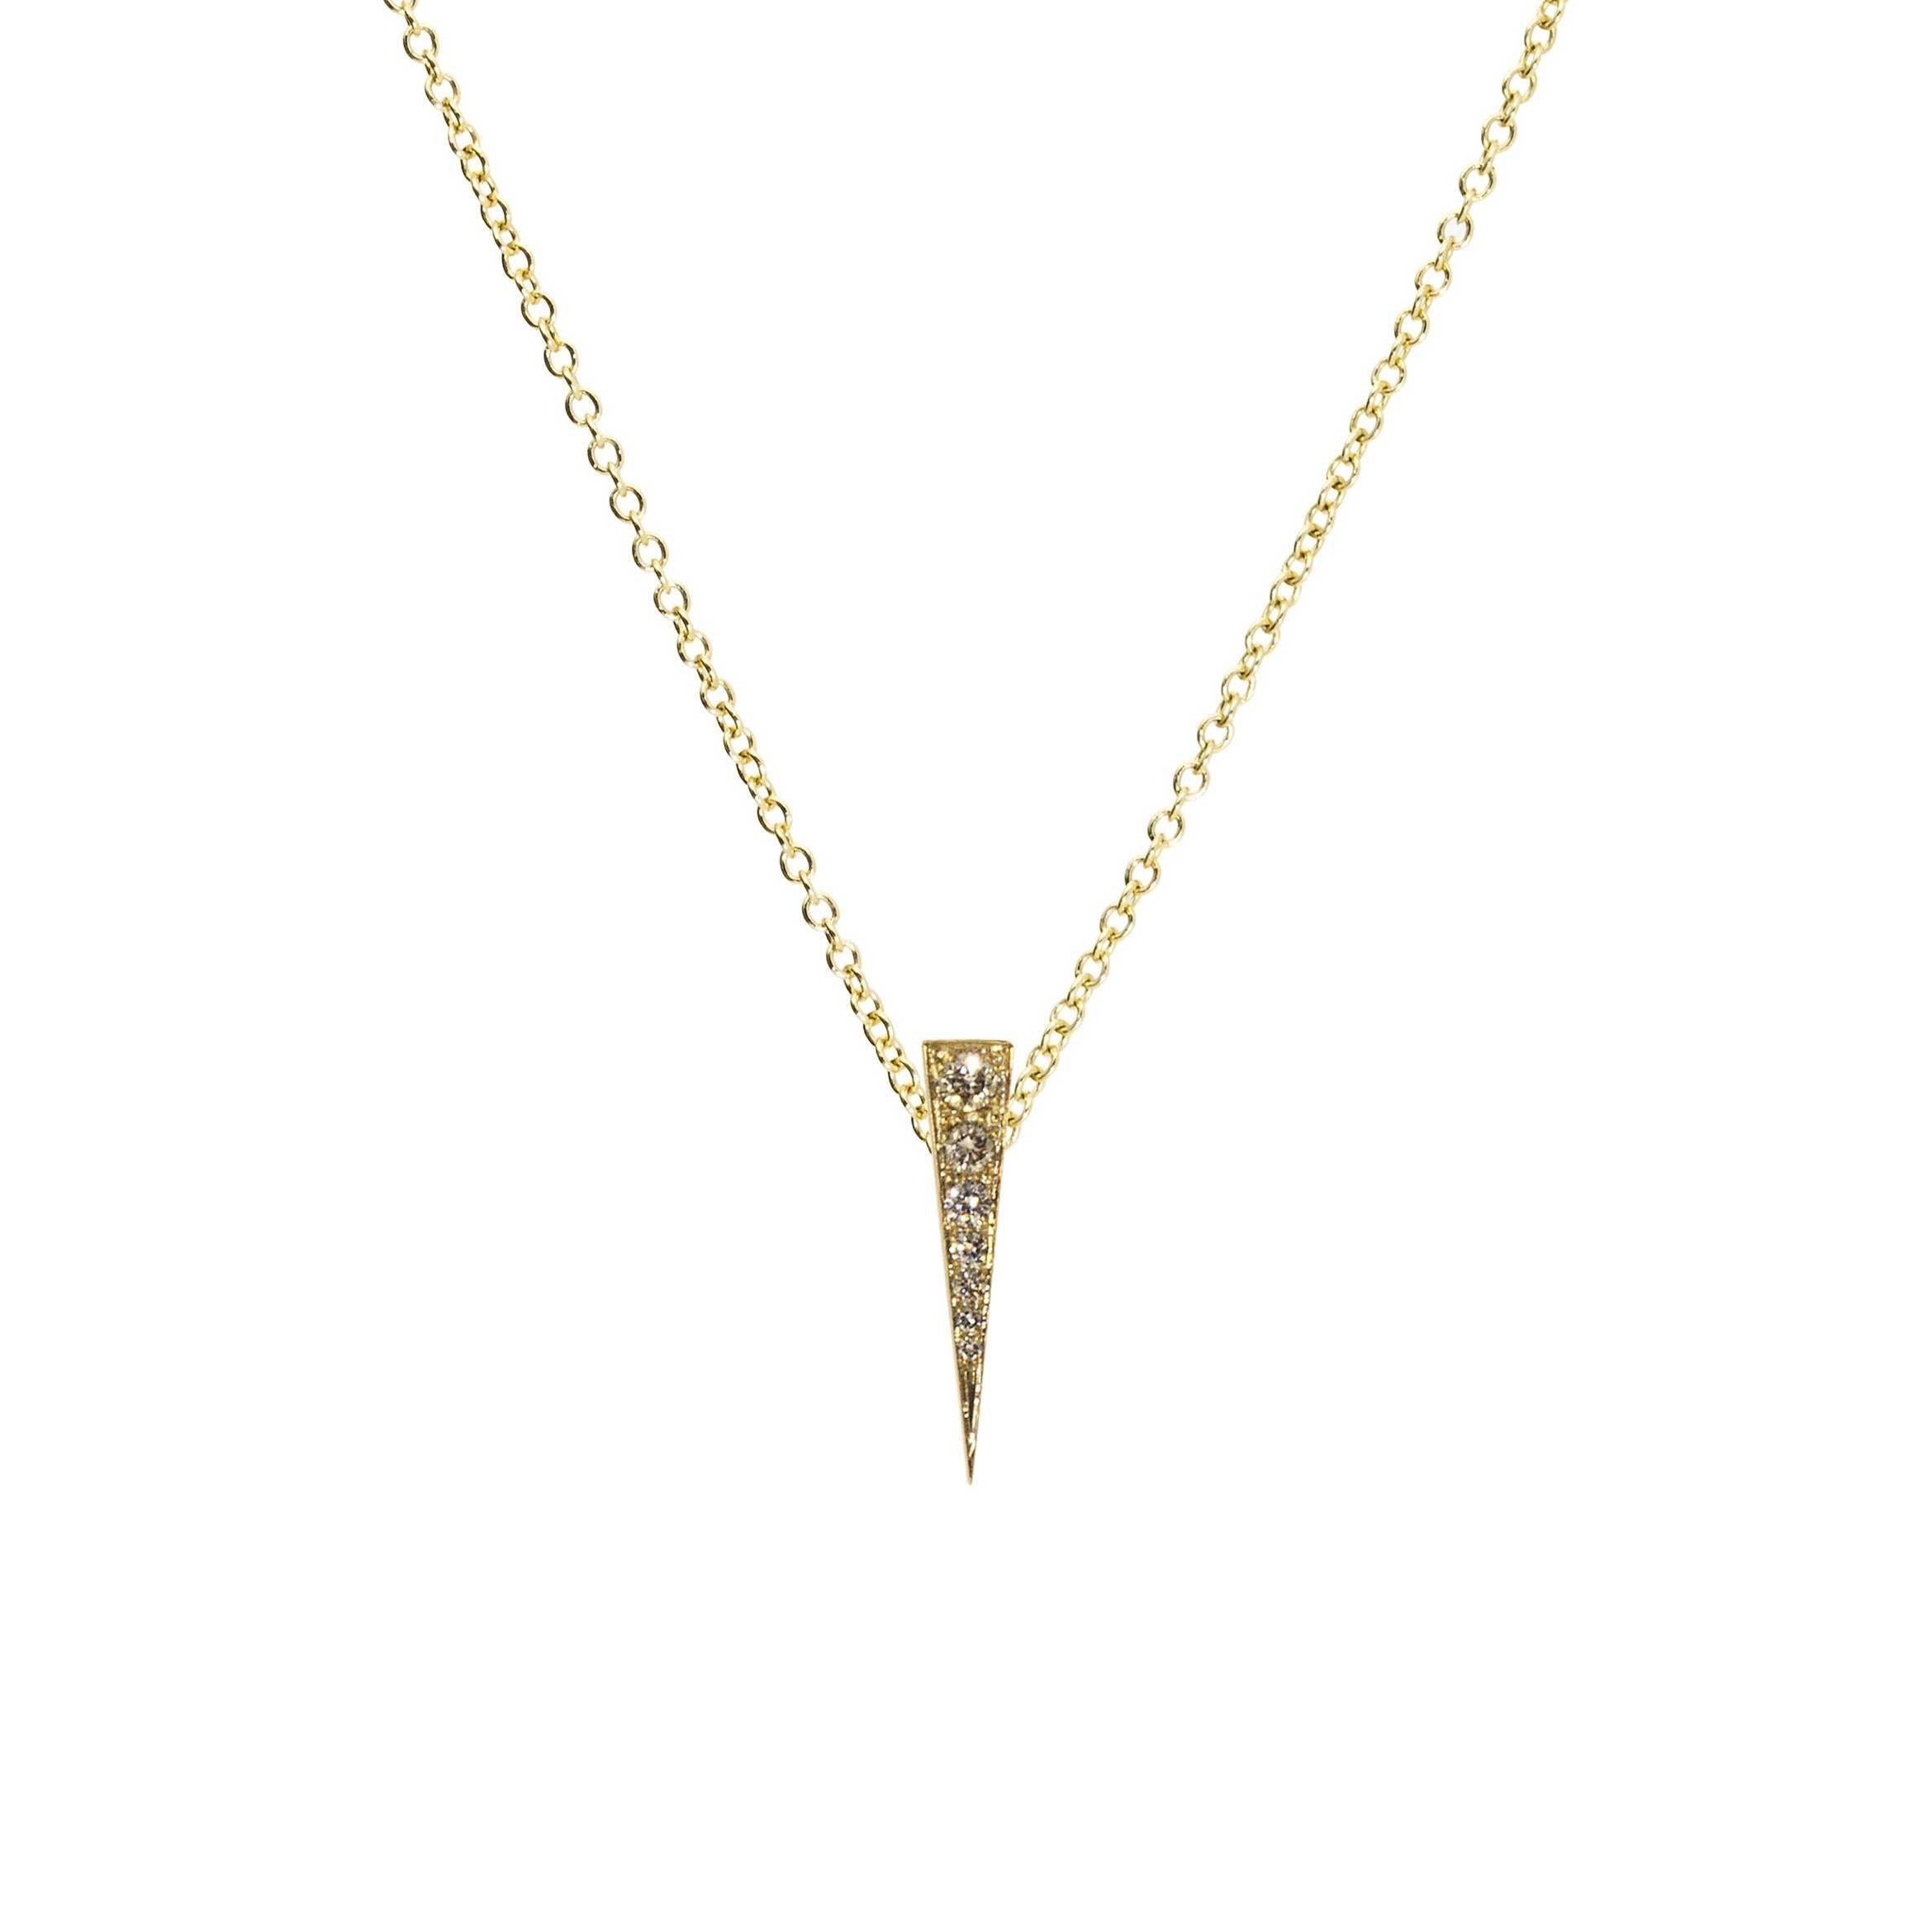 The Spark Pendant in 18 carat Yellow Gold and Diamonds is a delicate modern, elegant and refined design, while deceptively simple it can be worn pointed upwards or downwards. The signature Daou Spark from the collection of delicate stacking rings